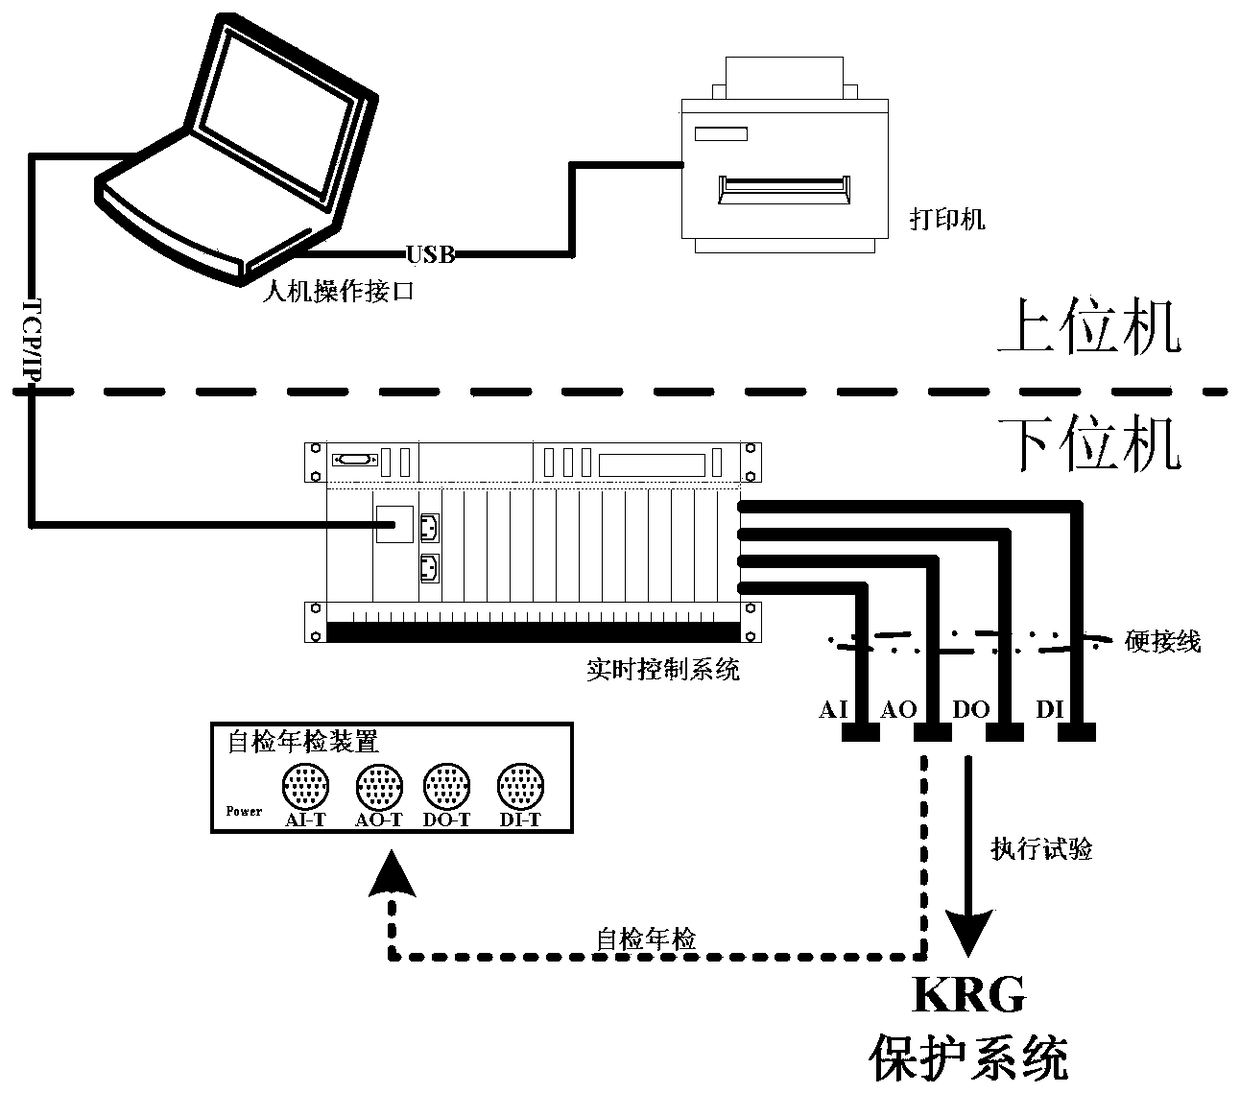 A Periodic Test System for Protection System of PWR Nuclear Power Plant